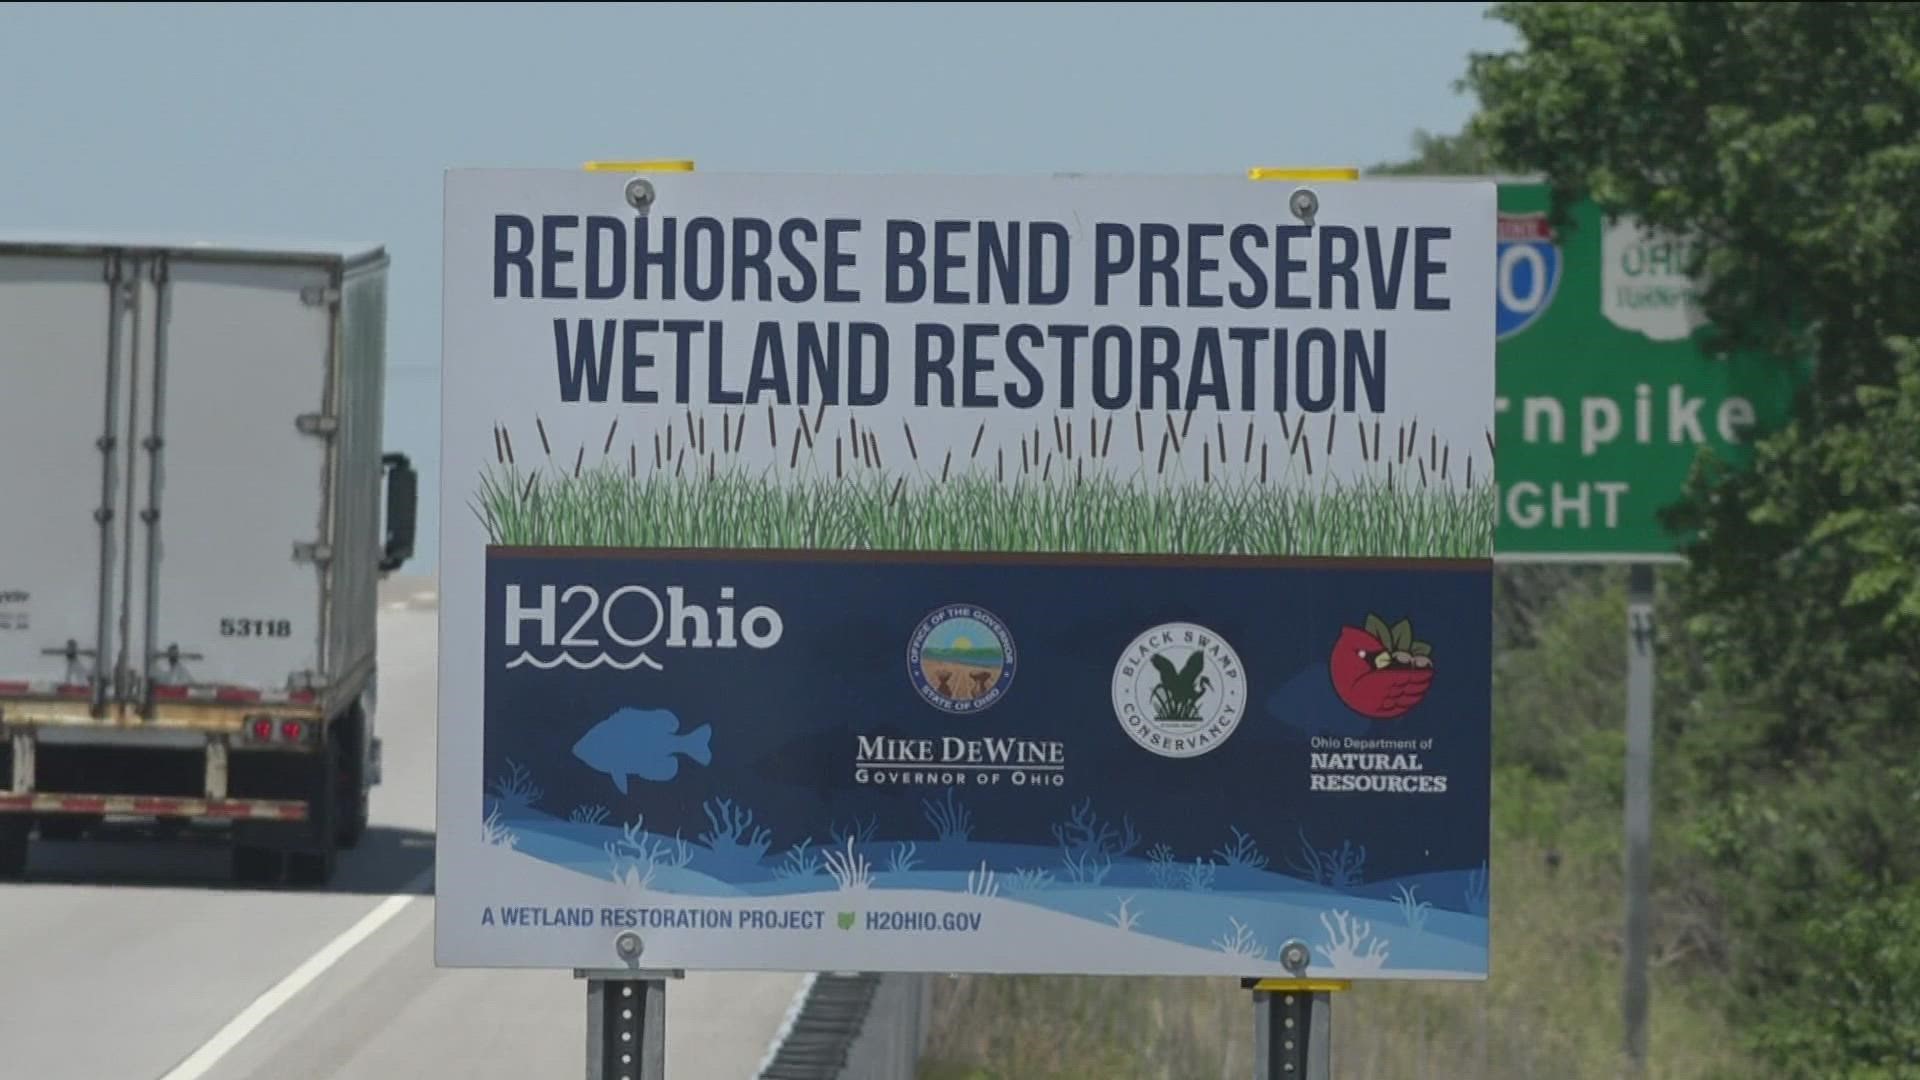 The area has been rehabilitated from farmland to wetland and prairie by the Black Swamp Conservancy to restore natural wildlife and improve Lake Erie water quality.